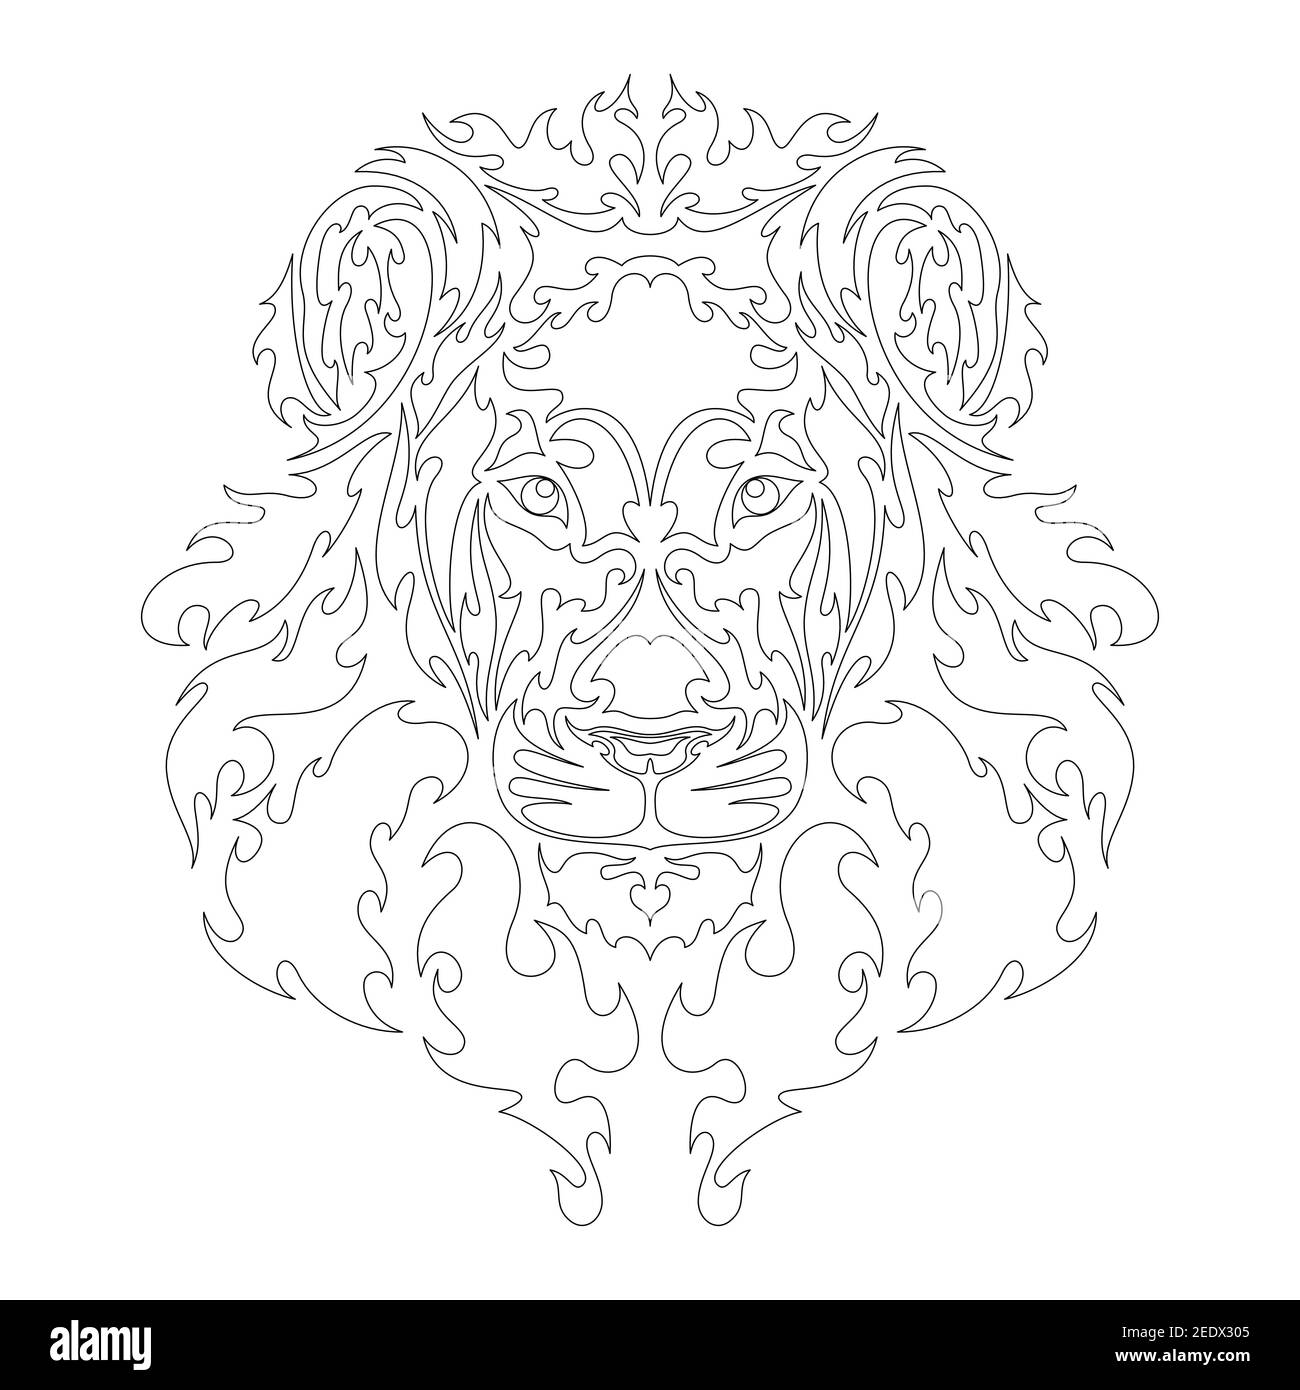 Hand drawn abstract portrait of a lion. Vector stylized illustration for tattoo, logo, wall decor, T-shirt print design or outwear. This drawing would Stock Vector